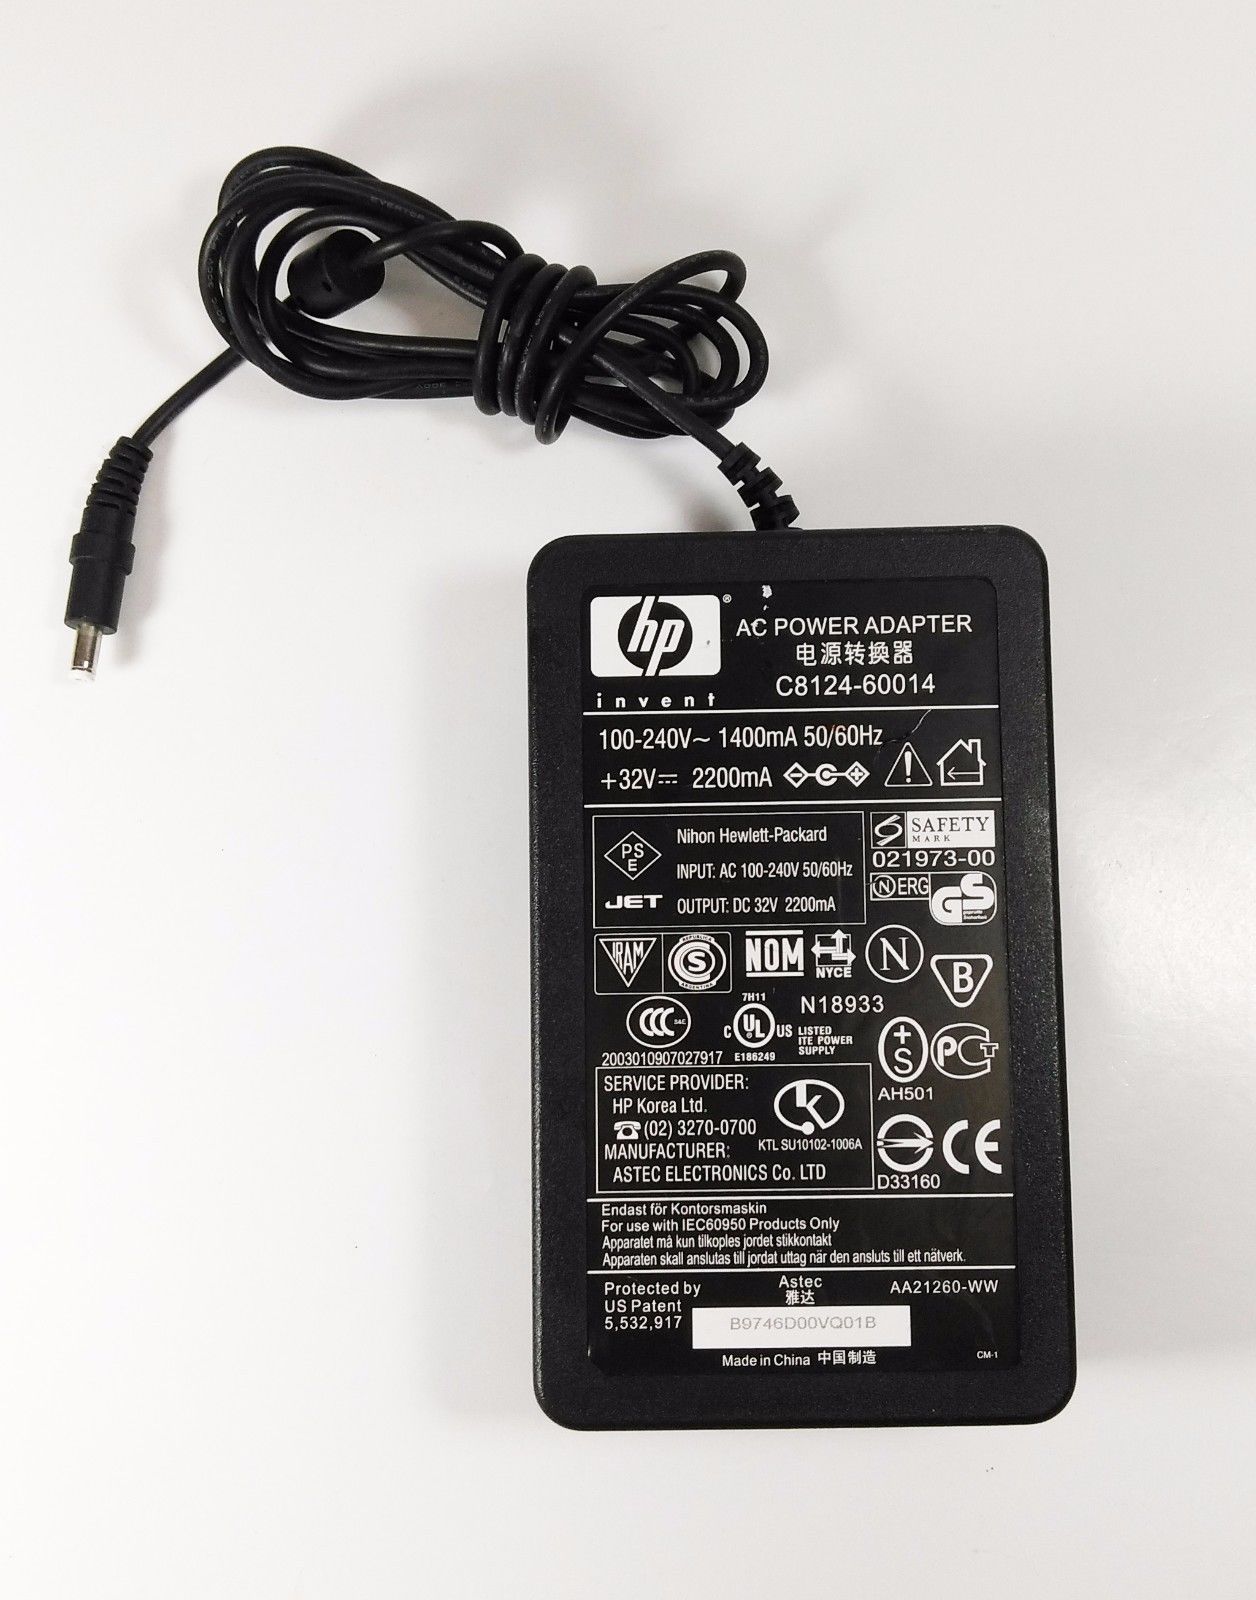 32V 2200mA 70W HP DeskJet C9025A Printer AC Power Adapter Charger